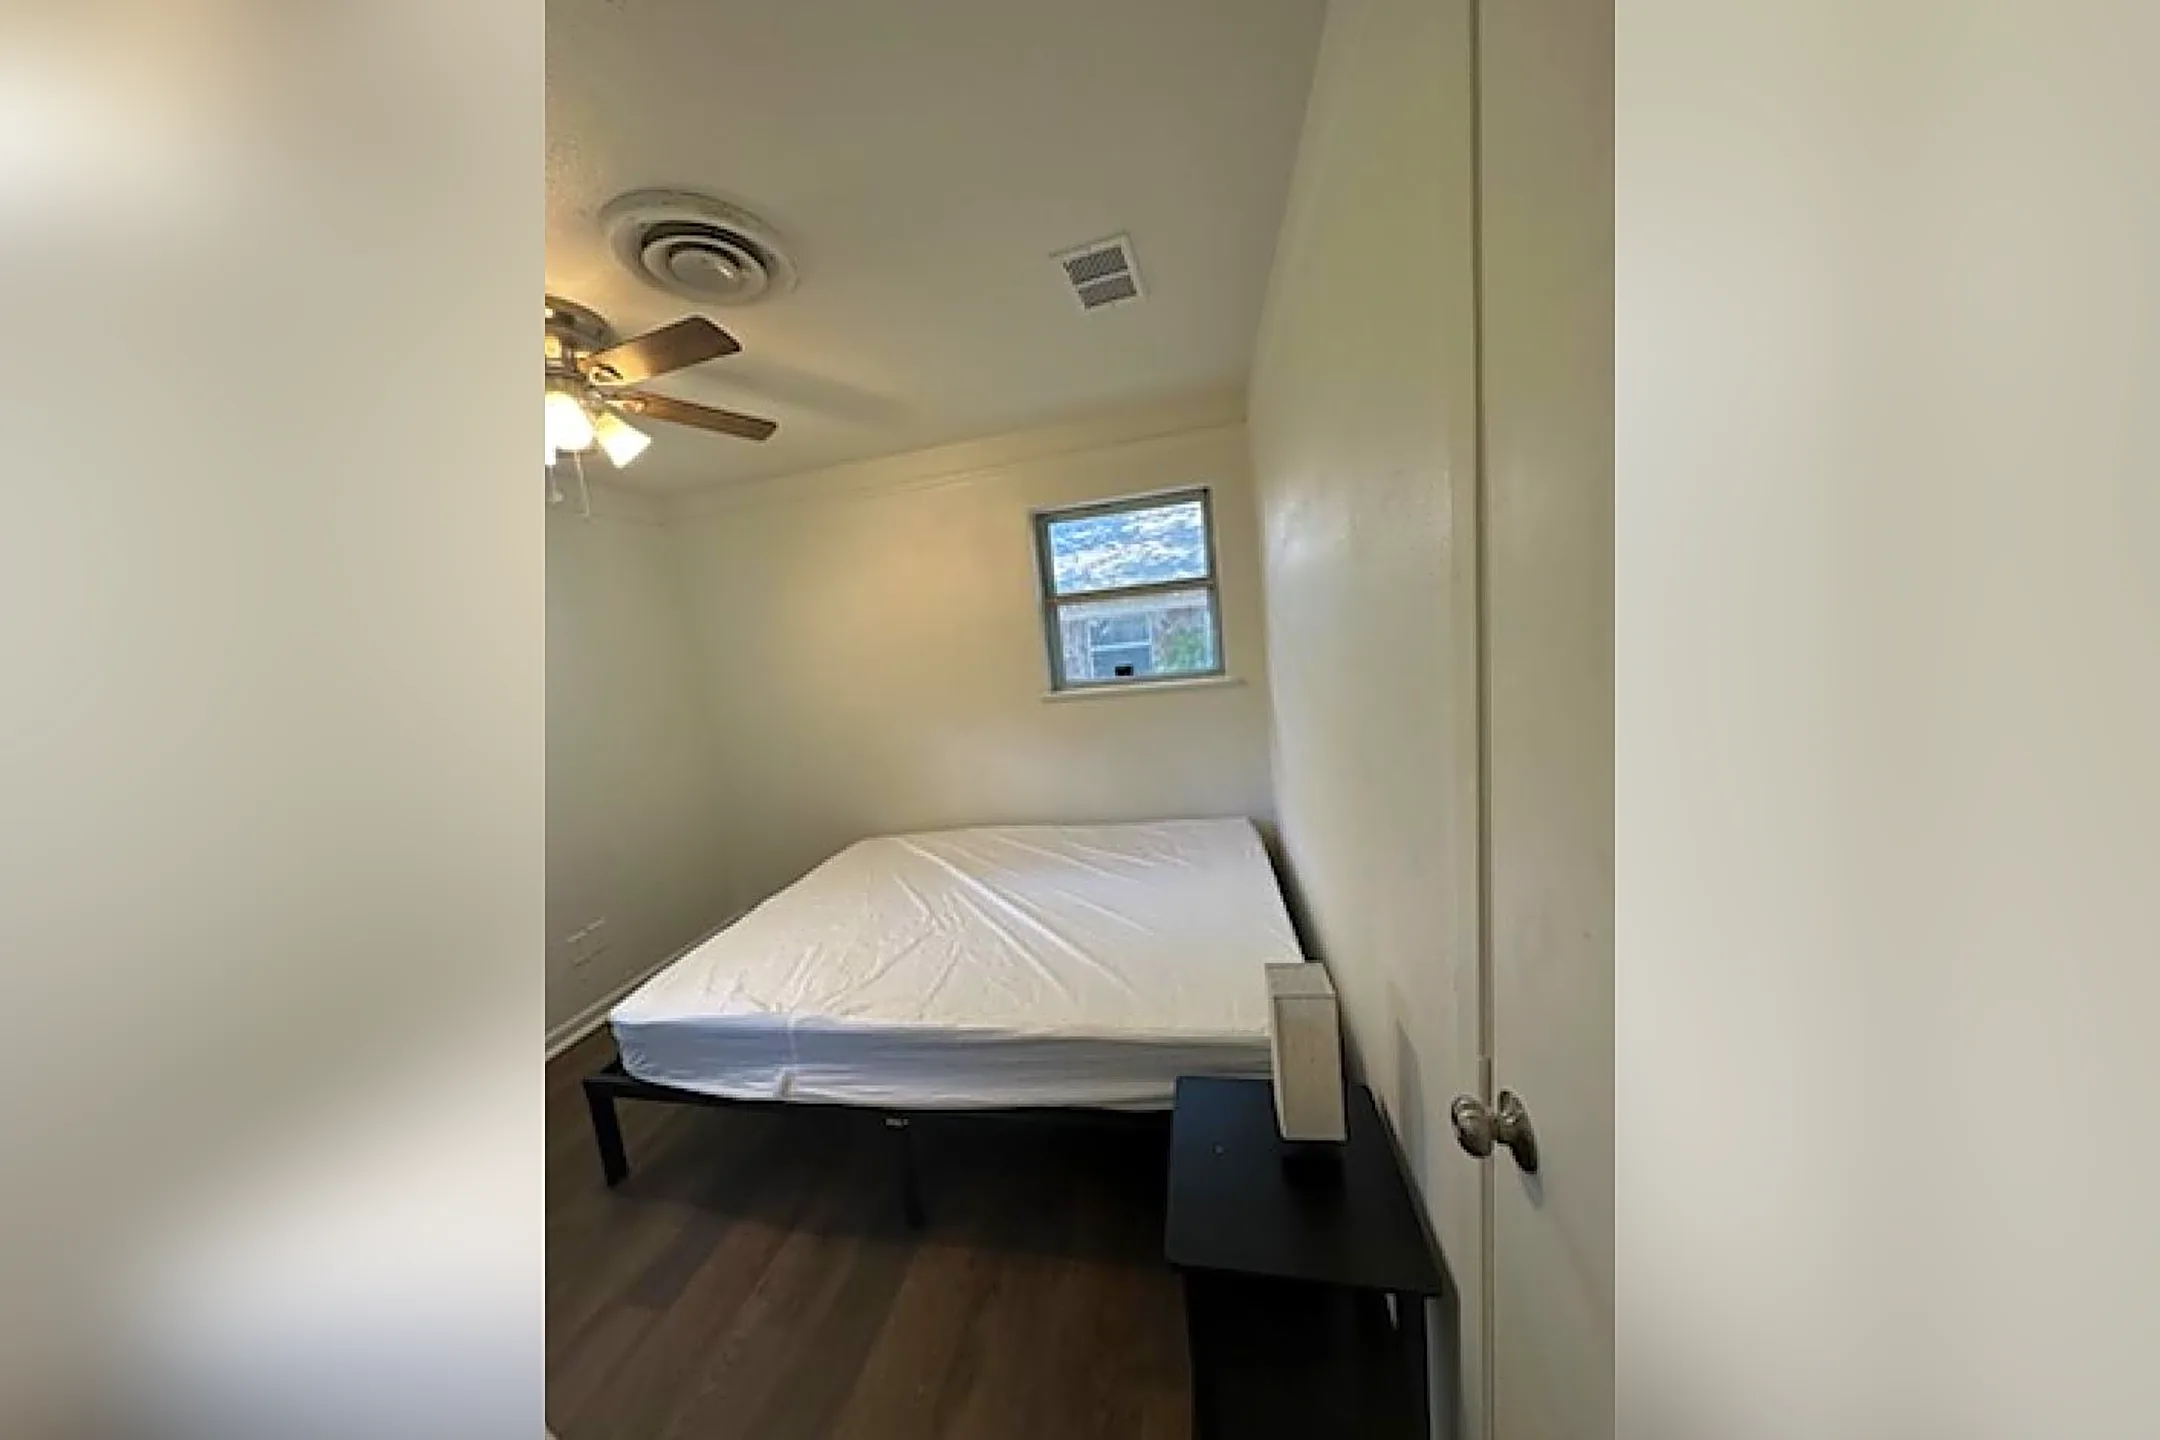 Bedroom - Room For Rent - Fort Worth, TX